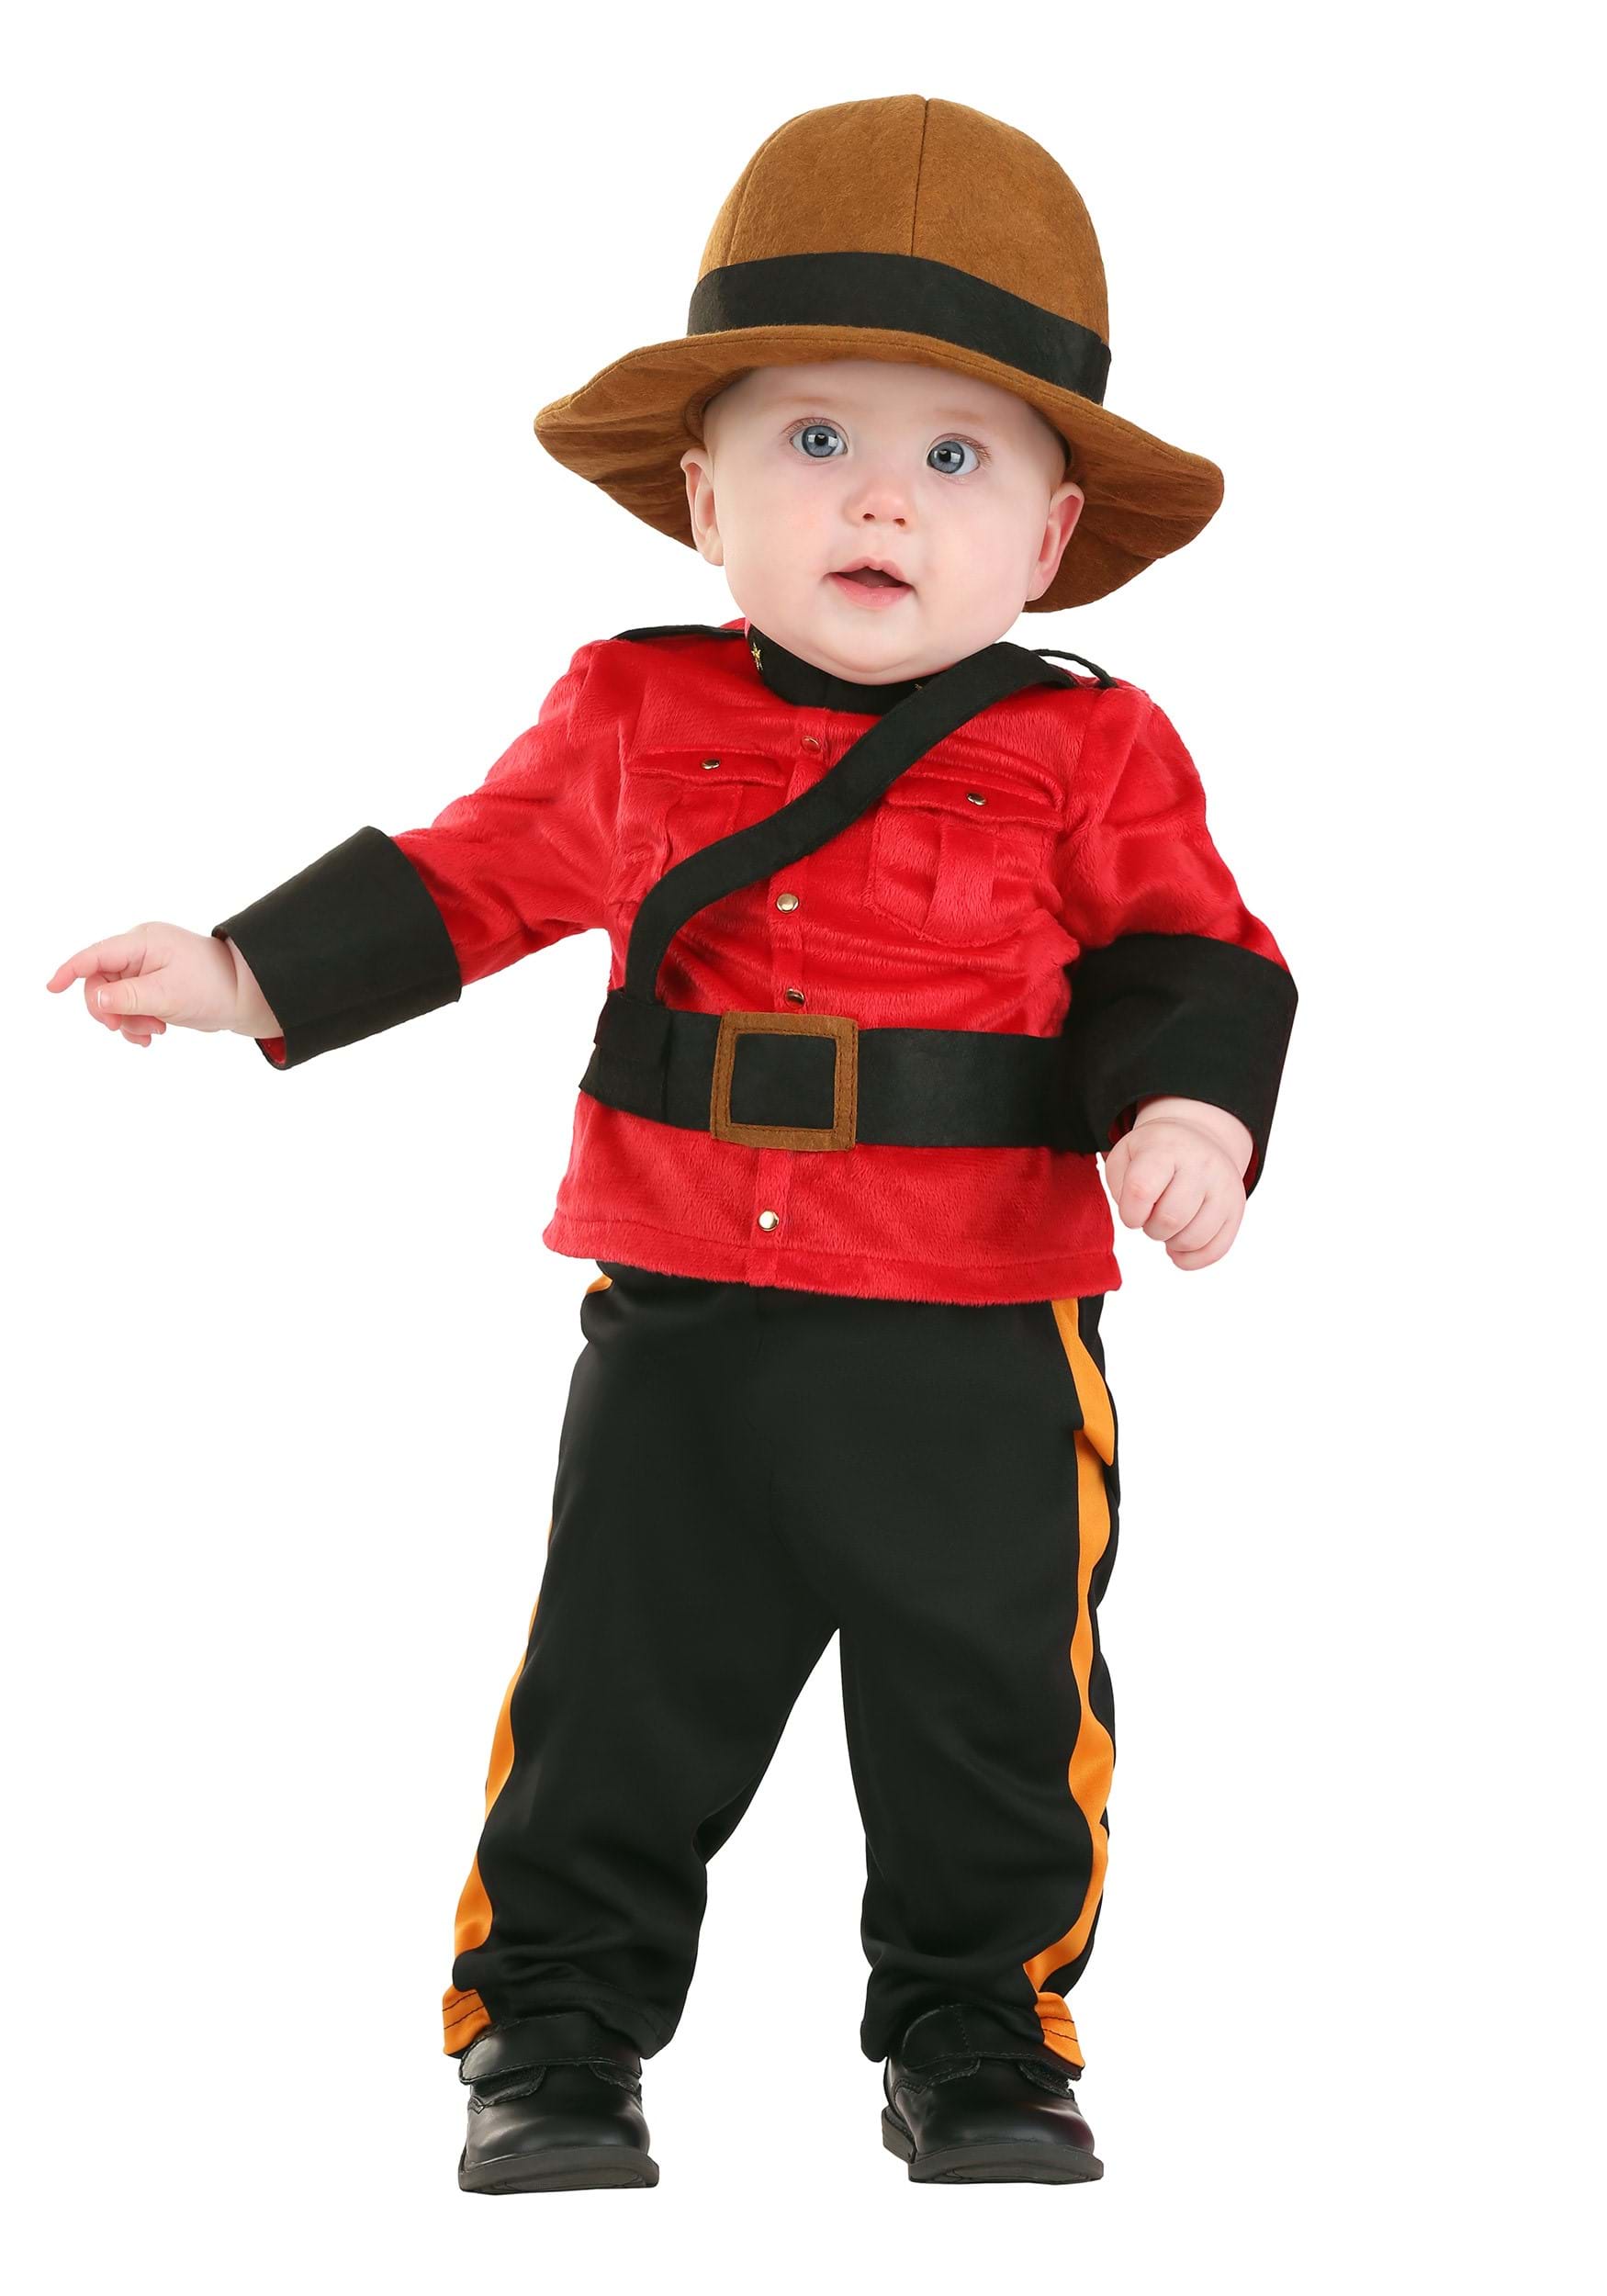 Canadian Mountie Infant Costume